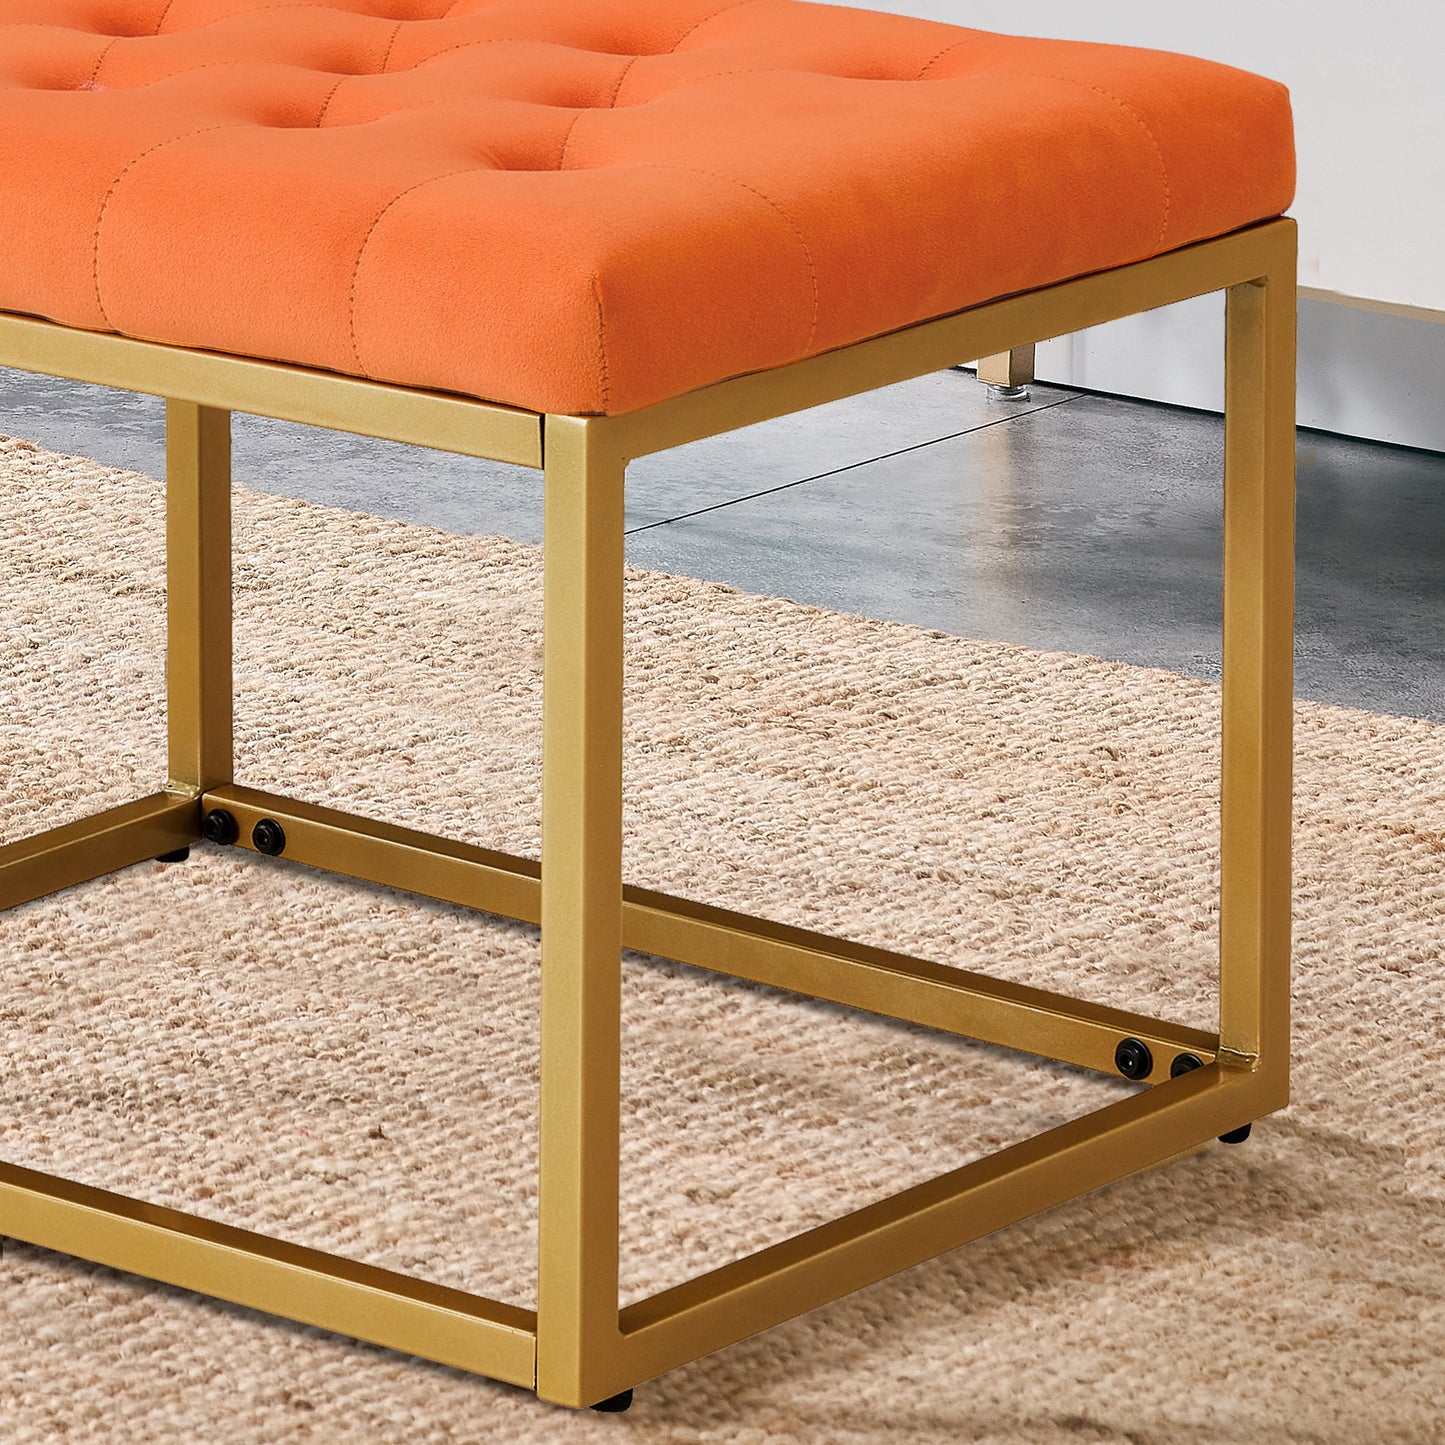 Velvet Shoe Changing Stool, Orange Footstool, Square Vanity Chair, Sofa stool,Makup Stool .Vanity Seat ,Rest stool. Piano Bench .Suitable for Clothes Shop,Living Room, Fitting Room BedroomST-001